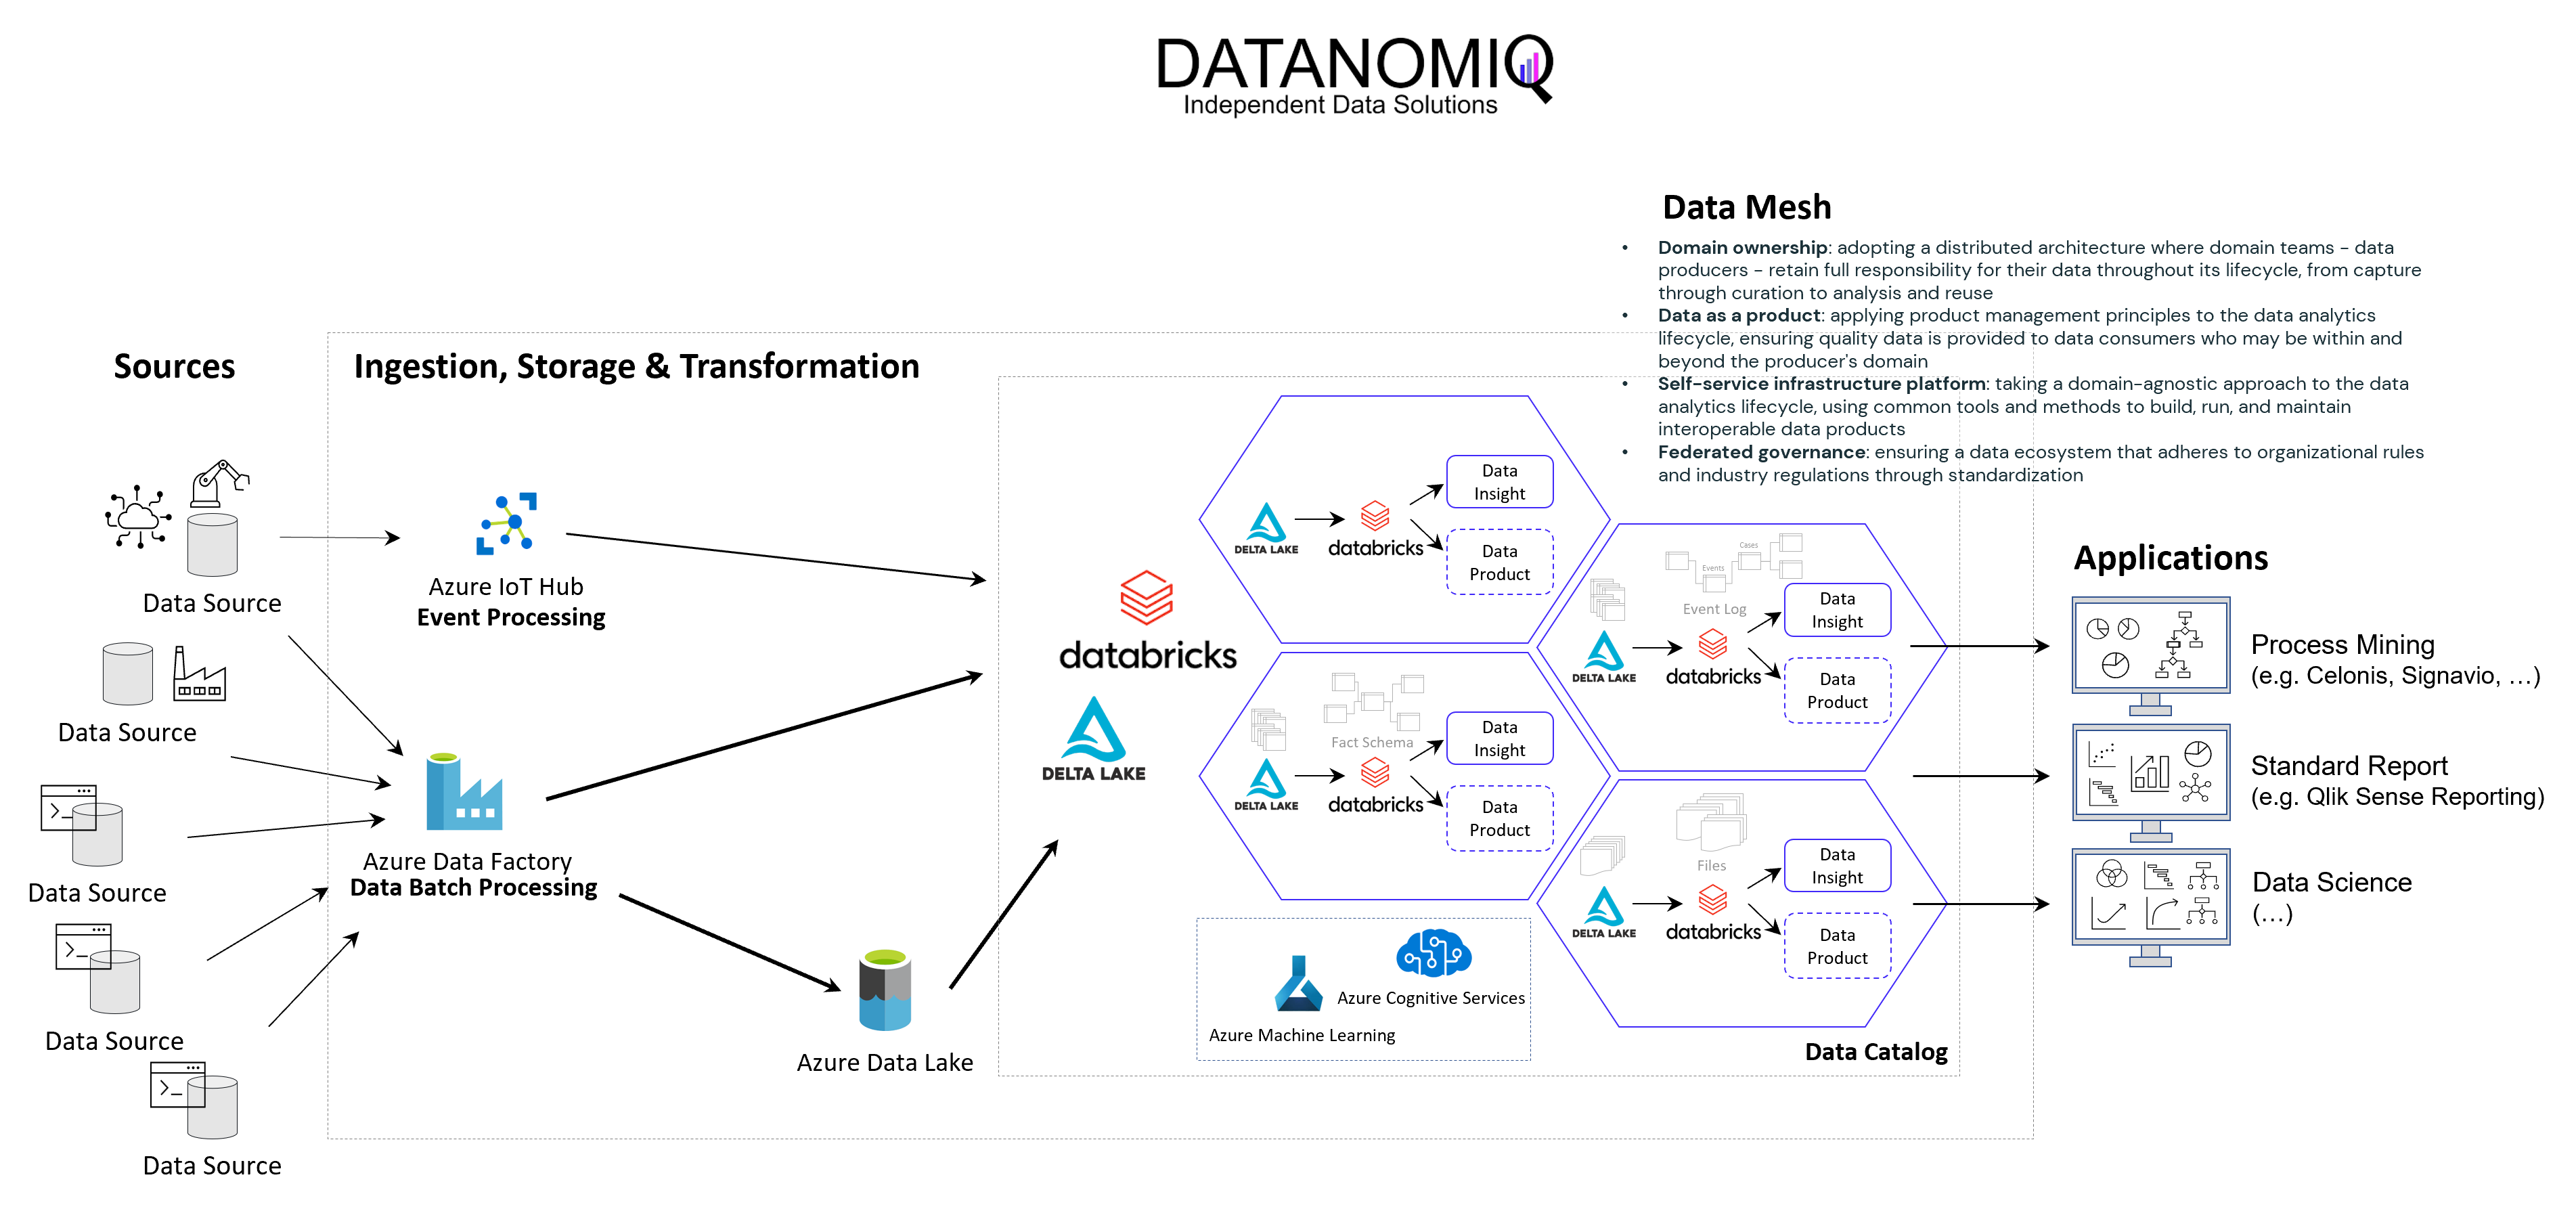 Data Mesh on Azure Cloud with Databricks and Delta Lake for Applications of Business Intelligence, Data Science and Process Mining.